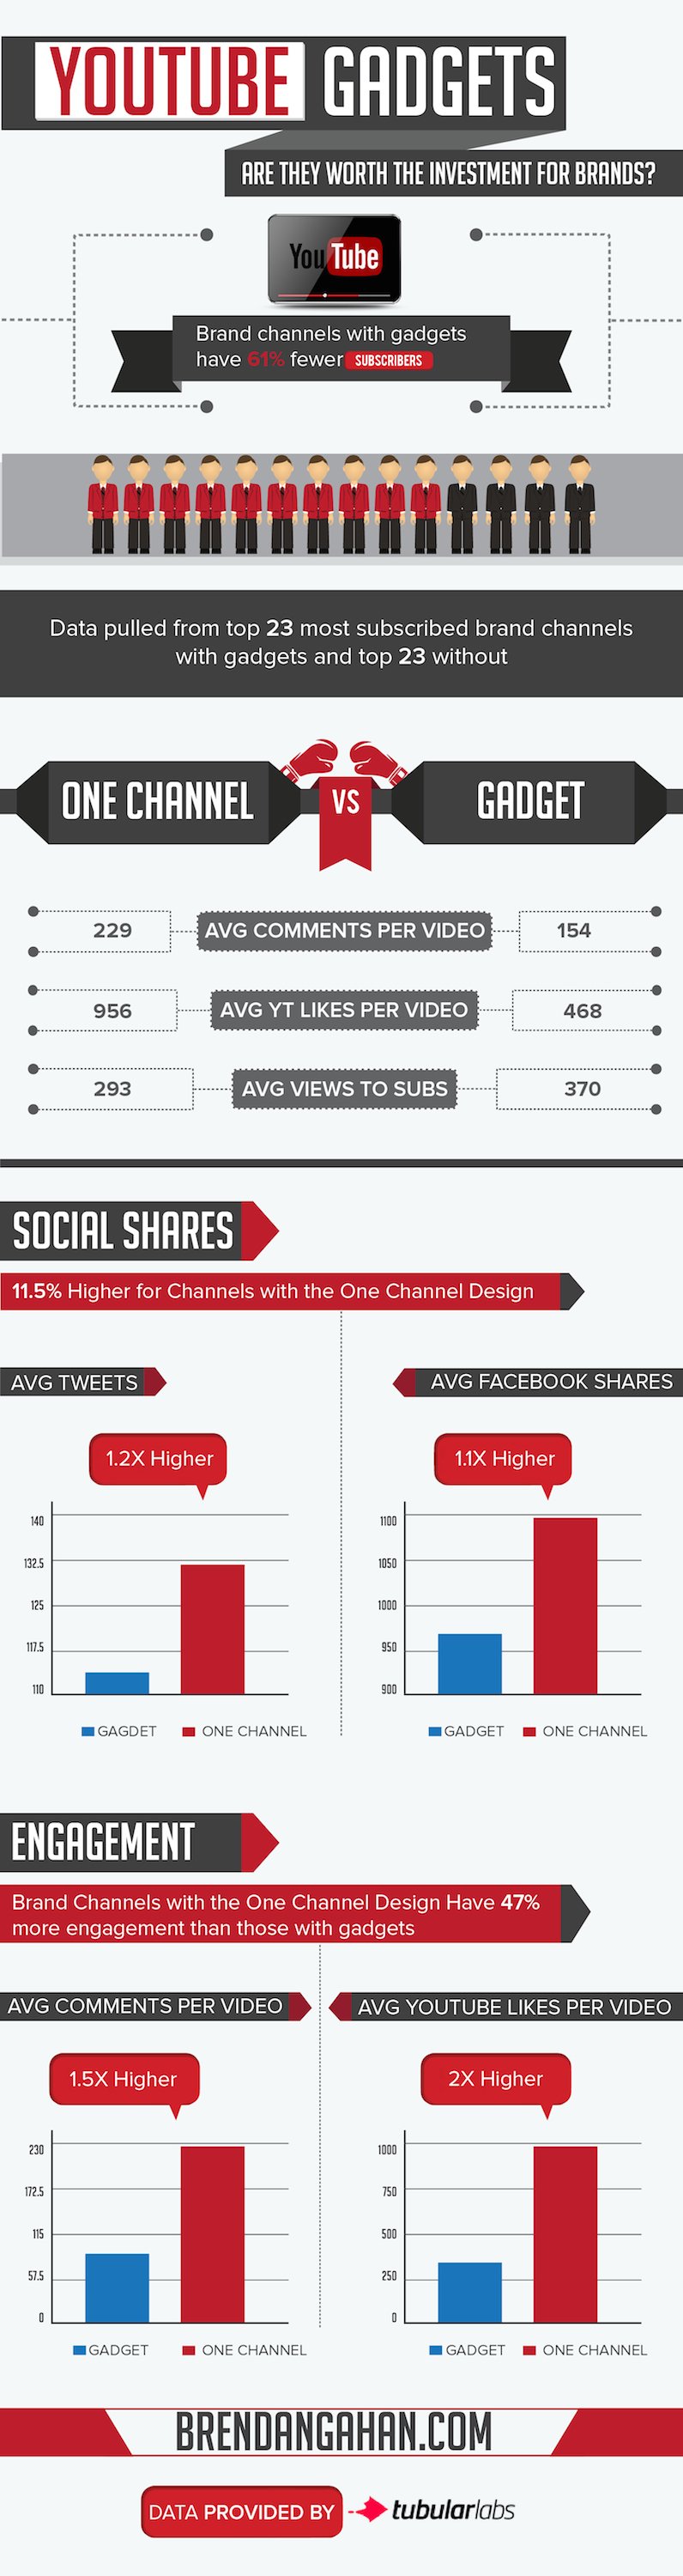 Are YouTube Gadgets Worth the Investment for Brands (Infographic)